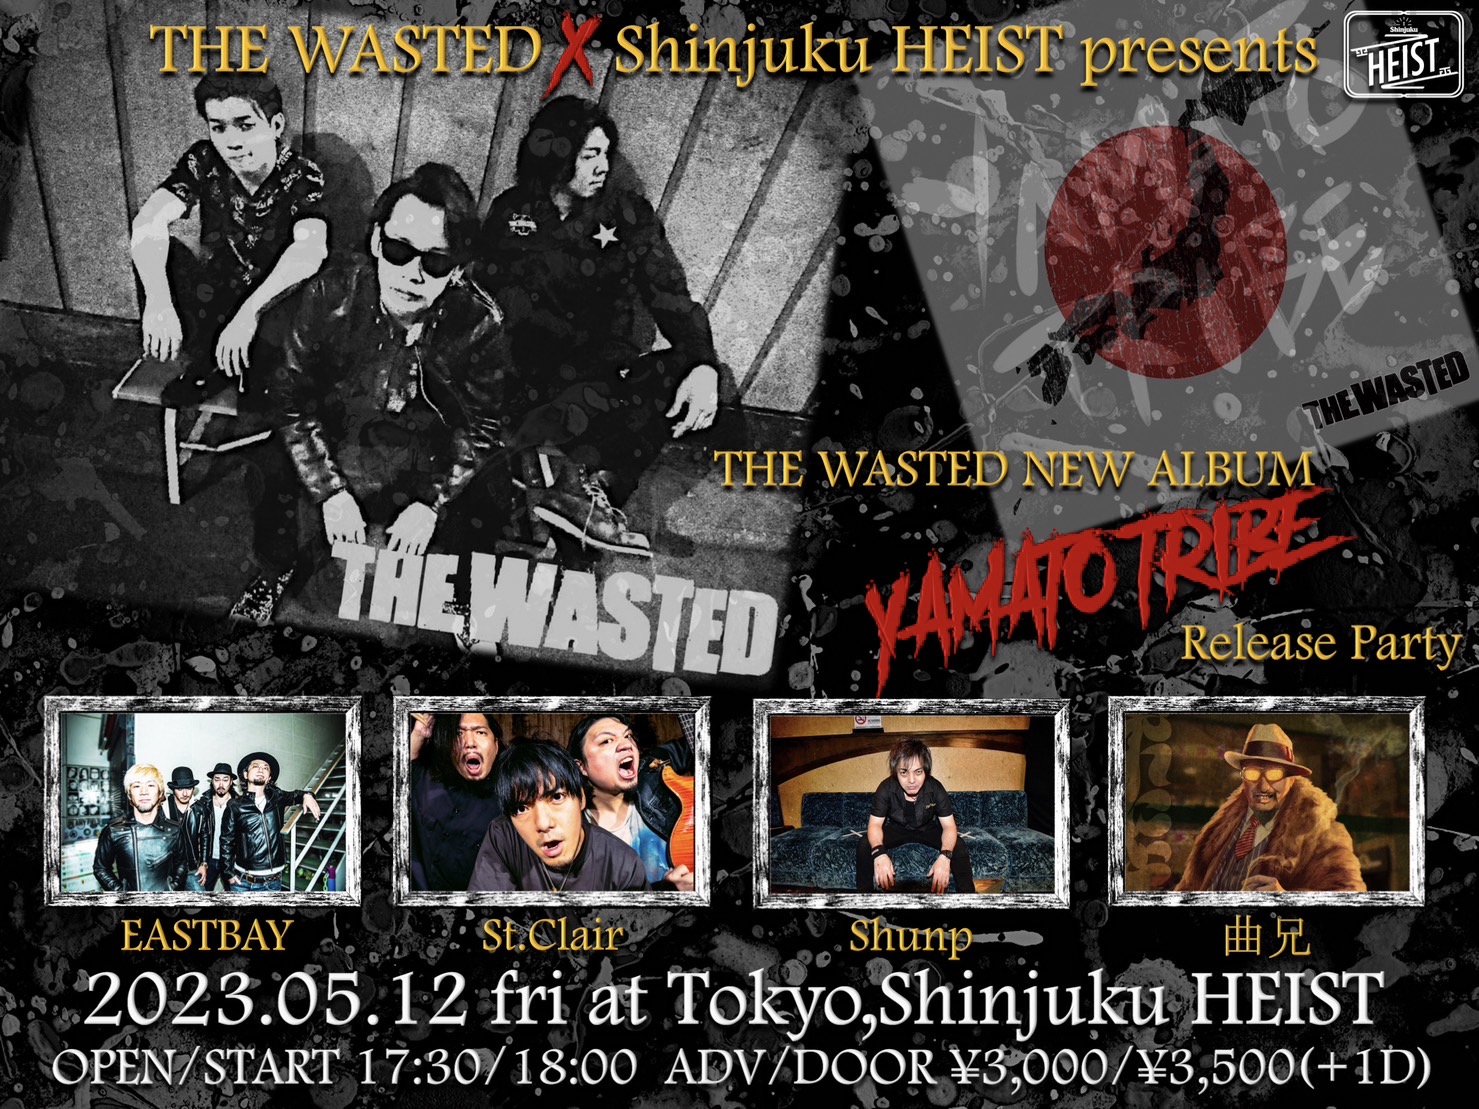 THE WASTED × Shinjuku HEIST presents THE WASTED New Album “YAMATO TRIBE”の写真